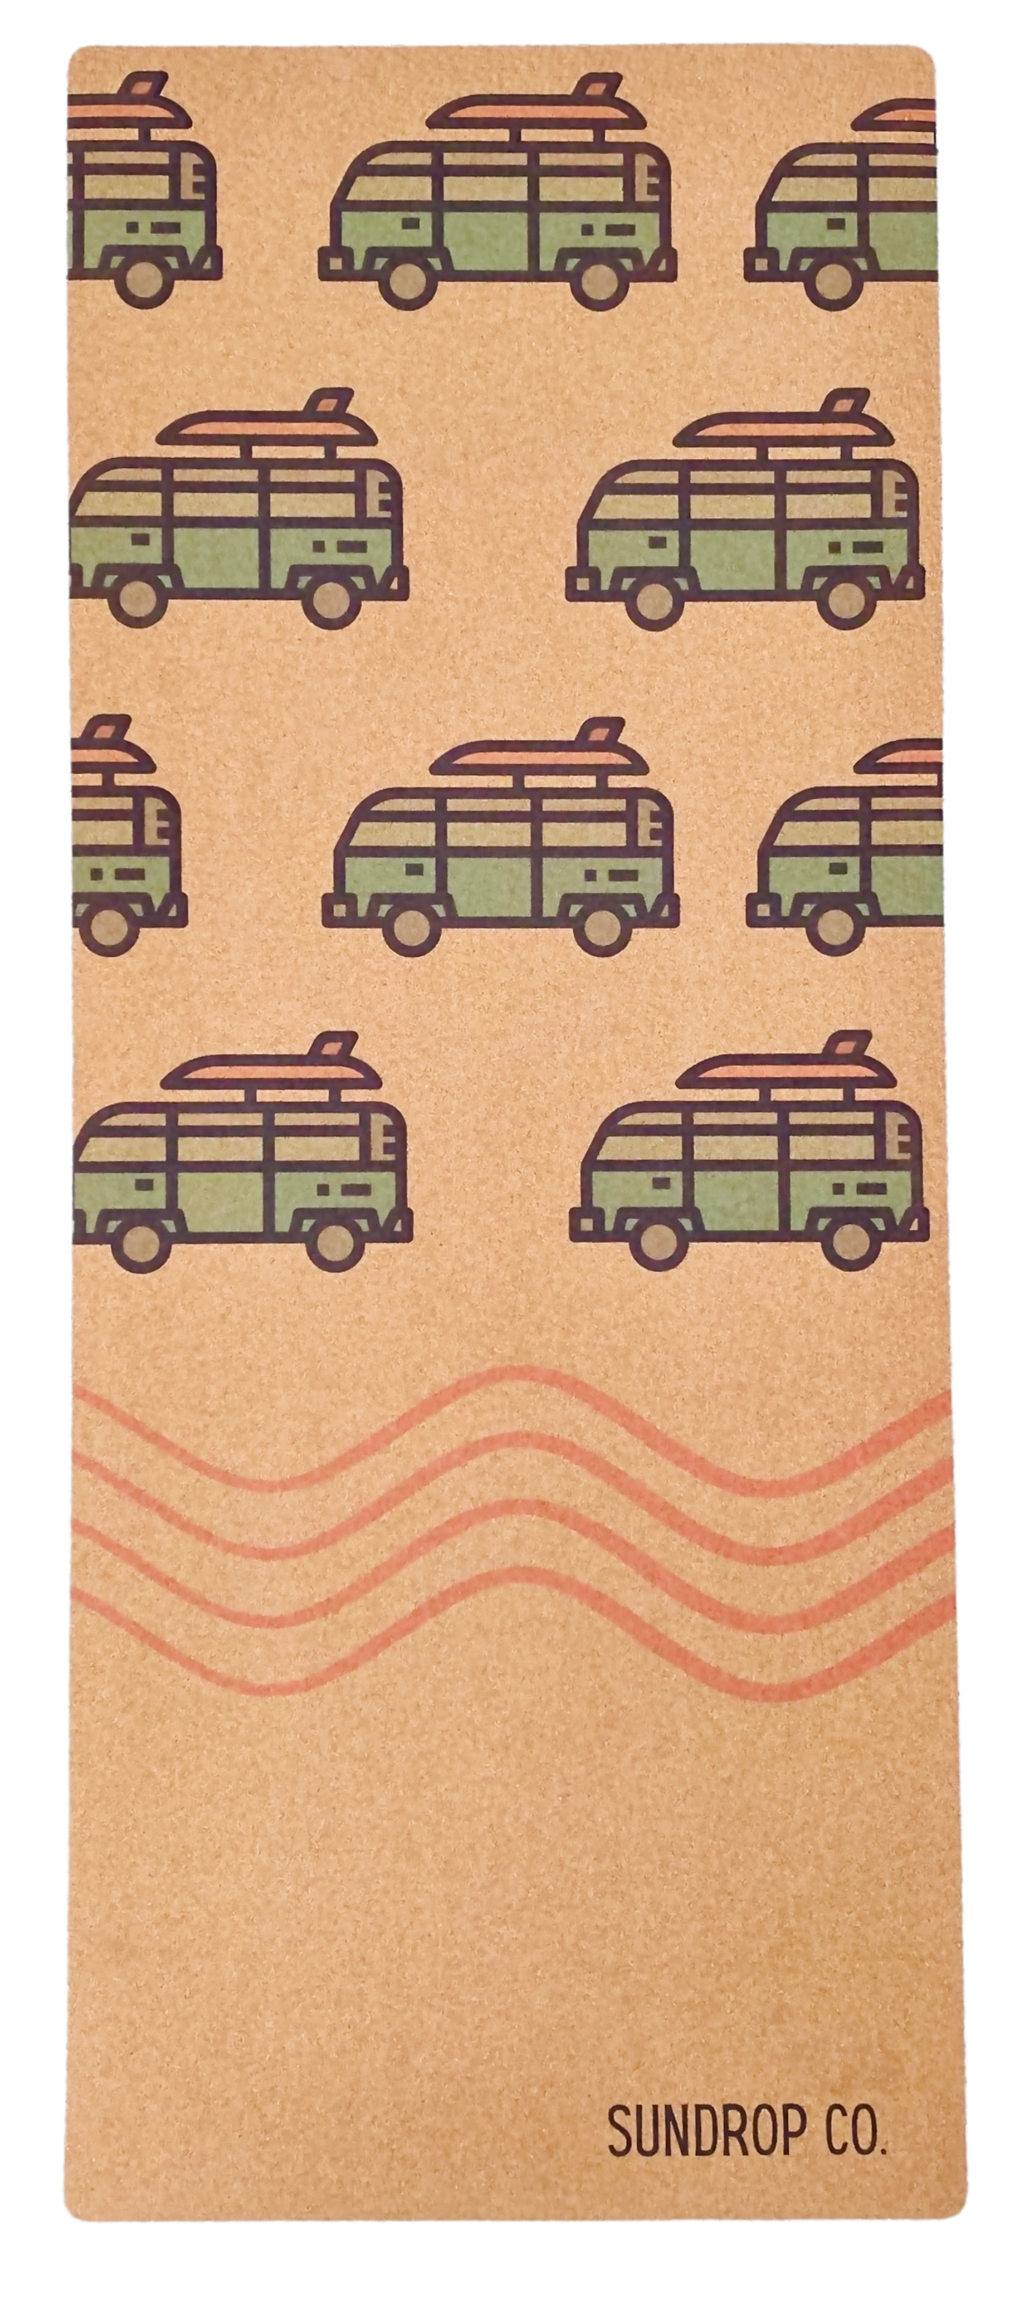 Surfs Up! Camper Van Kids Yoga Mat, 100% Sustainable cork and rubber children's yoga and activity mat.